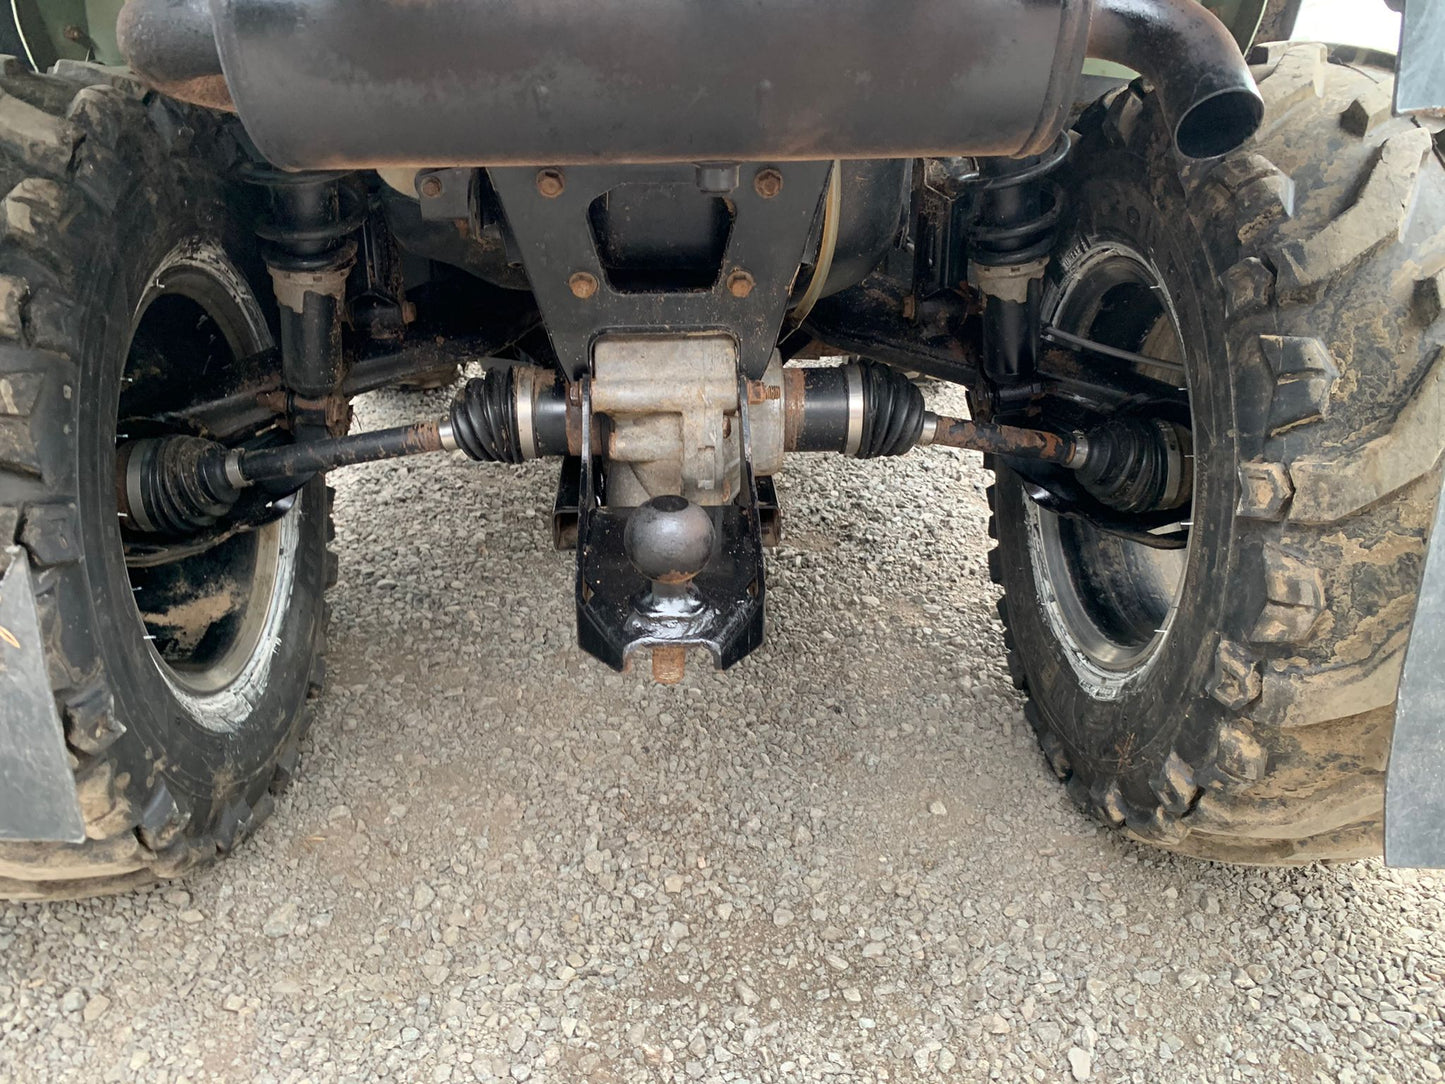 Bid on AUTOMATIC GEARBOX : 2019 CAN AM 570 OUTLANDER PRO- Buy &amp; Sell on Auction with EAMA Group